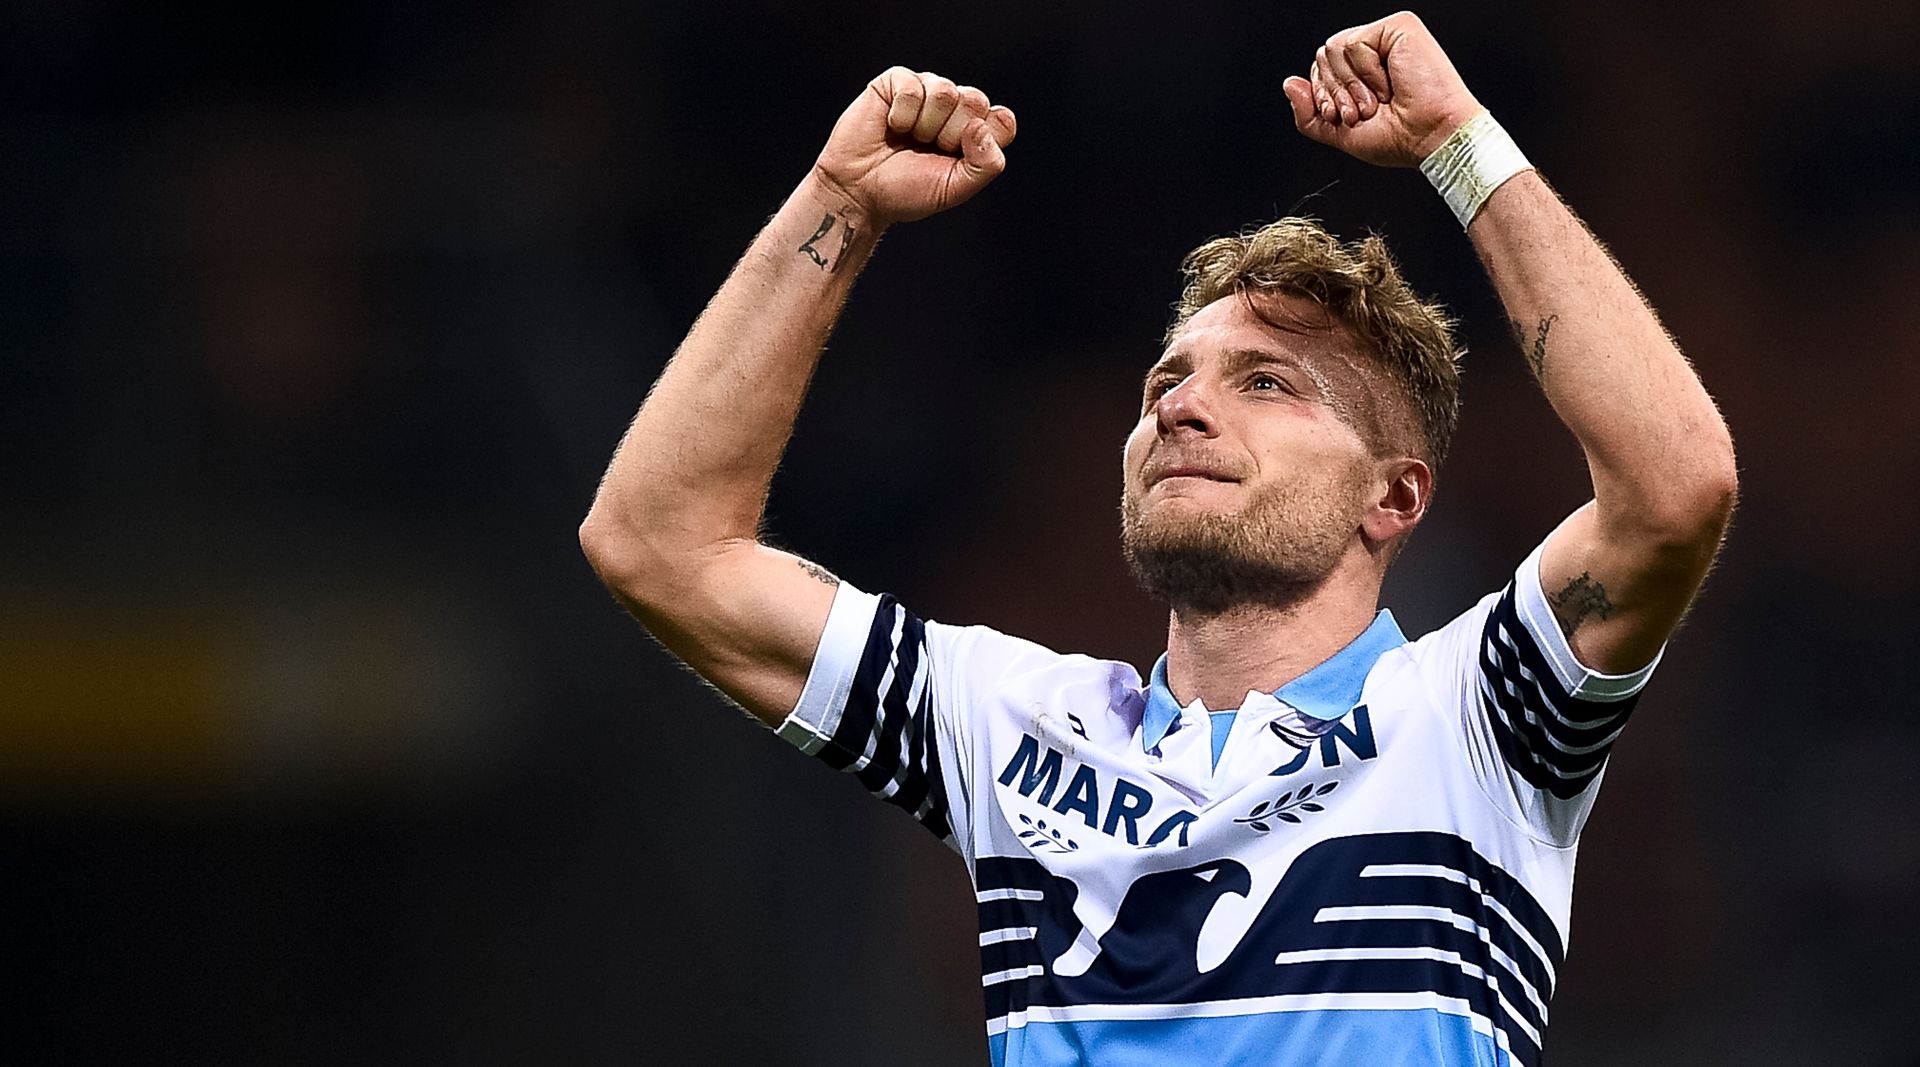 <p>                     Ciro Immobile flopped in Germany and Spain, but the Lazio icon has been a different proposition altogether in his homeland.                   </p>                                      <p>                     From his arrival in 2016 until the end of the decade, Immobile notched 84 league goals for the Biancocelesti - winning the 2013/14 <em>Capocannoniere</em> and sharing it four years later – as he went a long way to establishing himself as one of Serie A’s most prolific strikers of all time.                   </p>